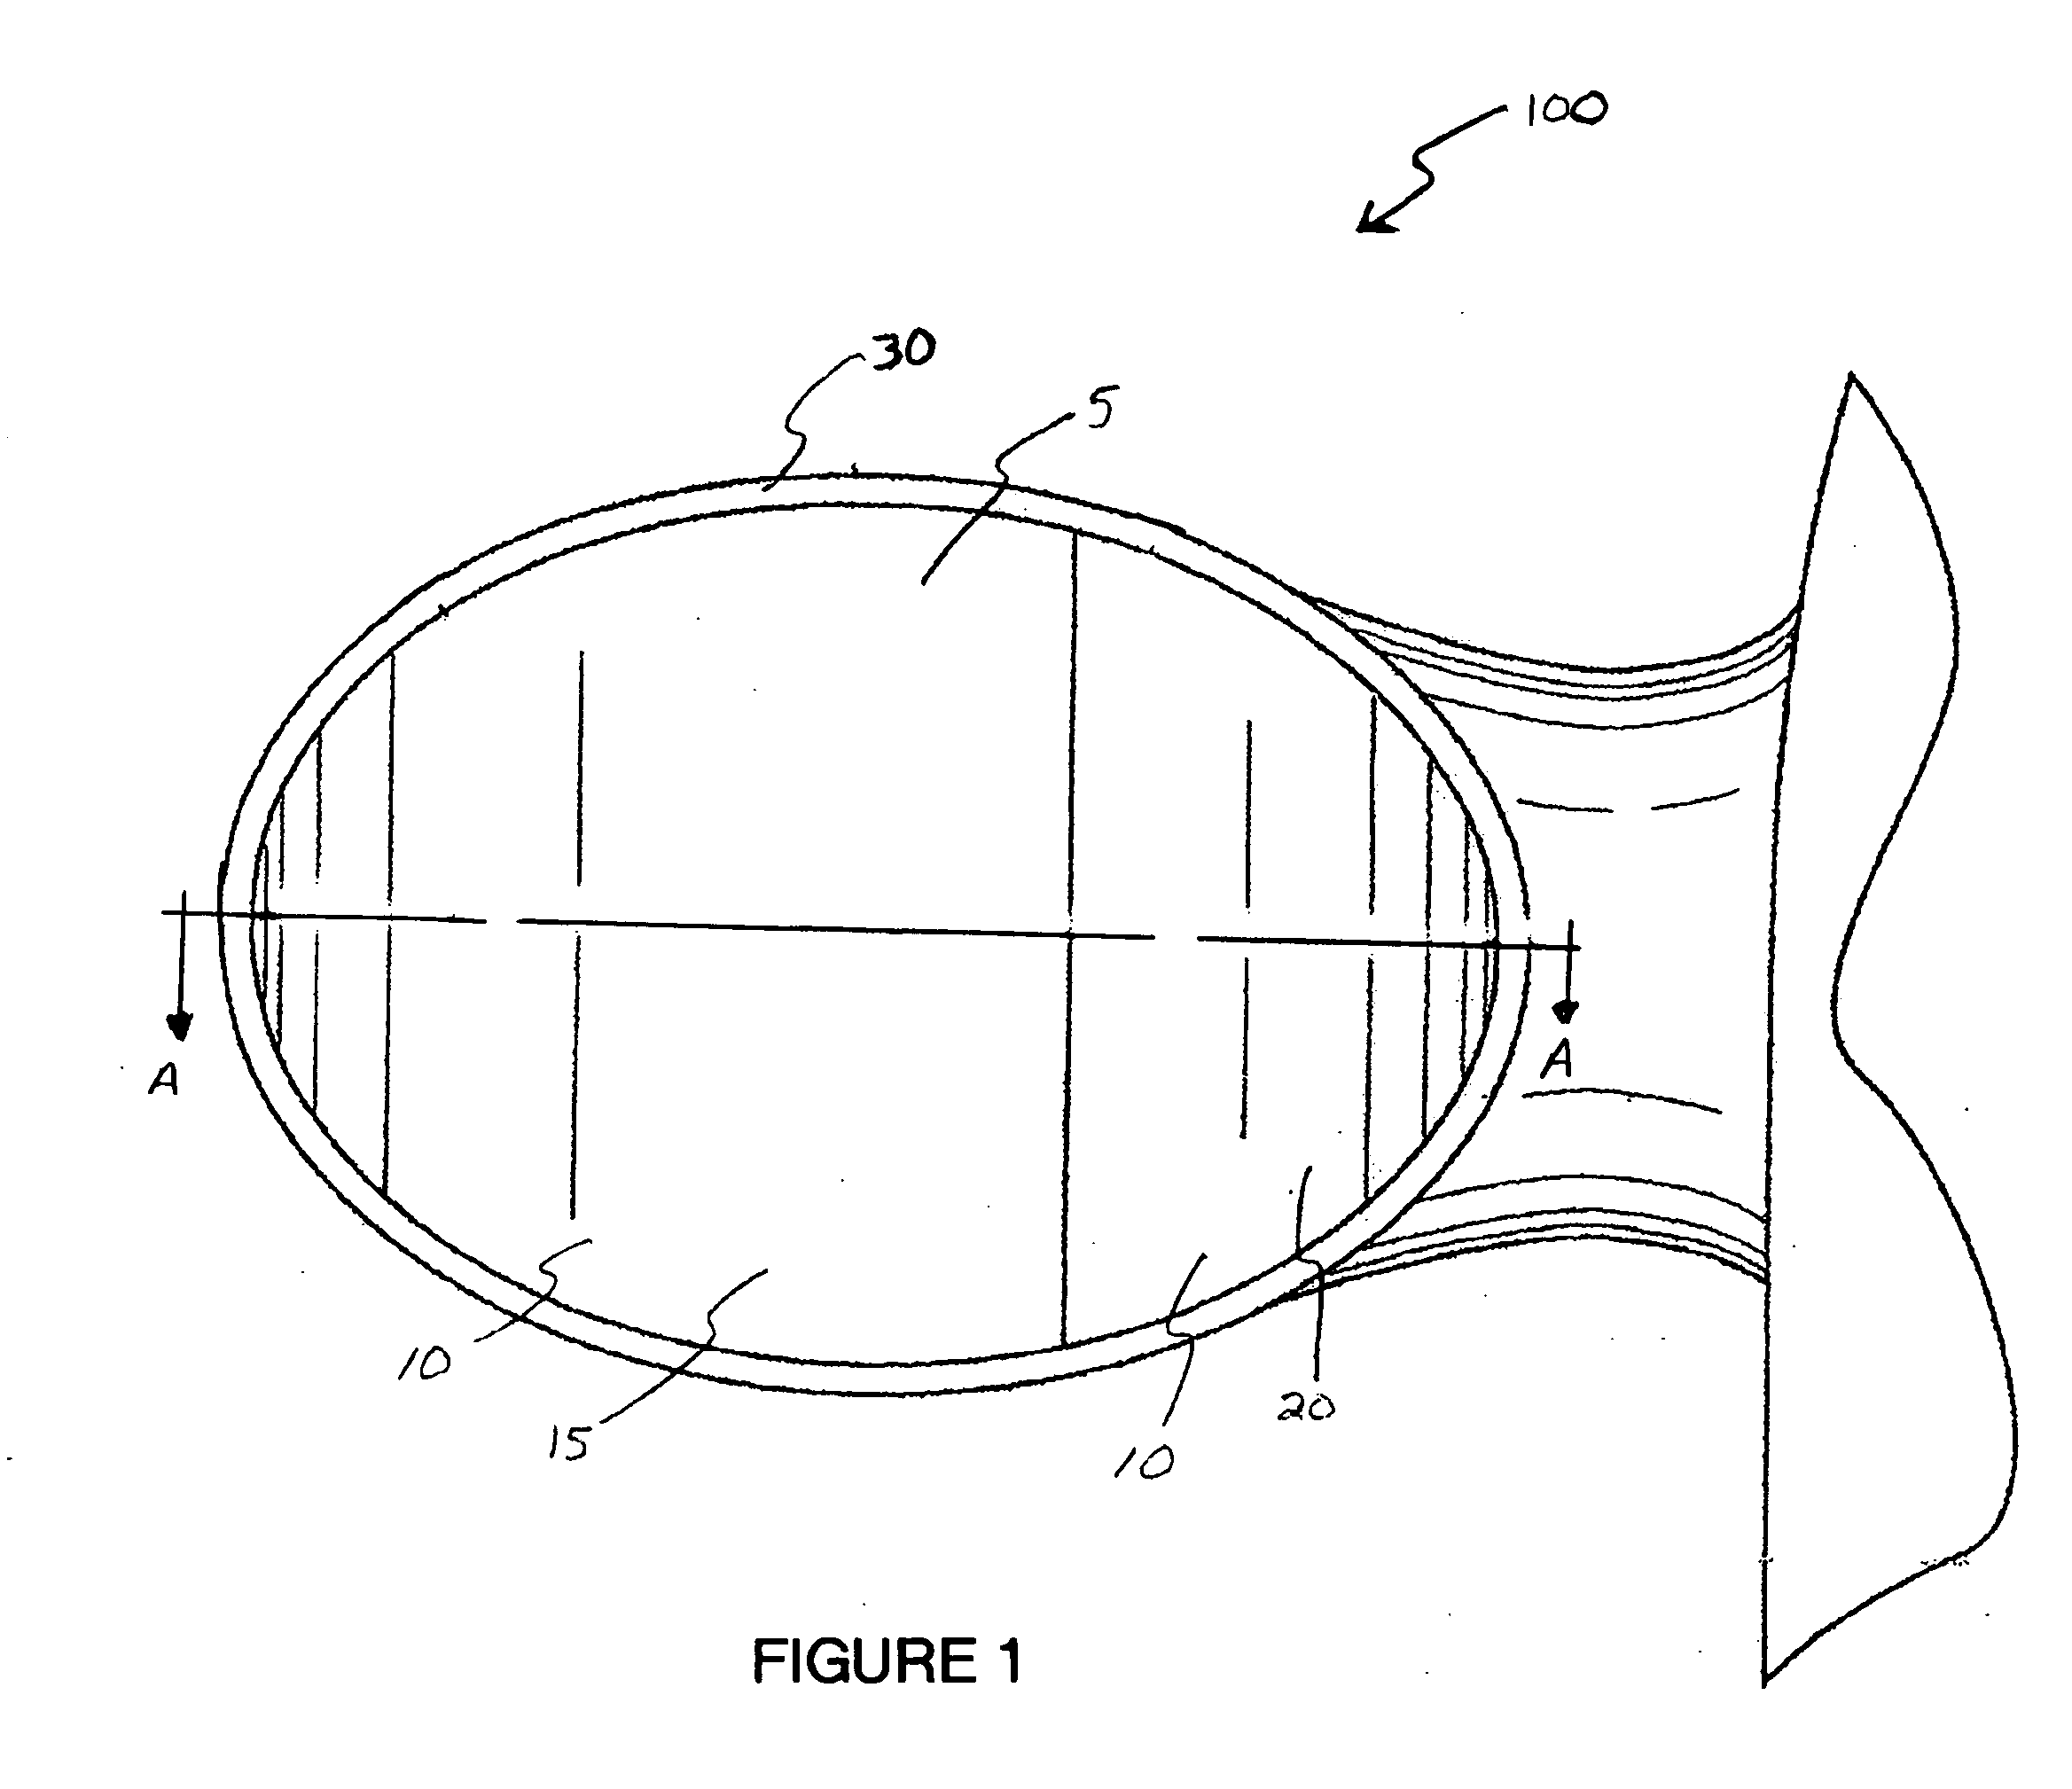 Rearview mirror with non-parallel viewing areas